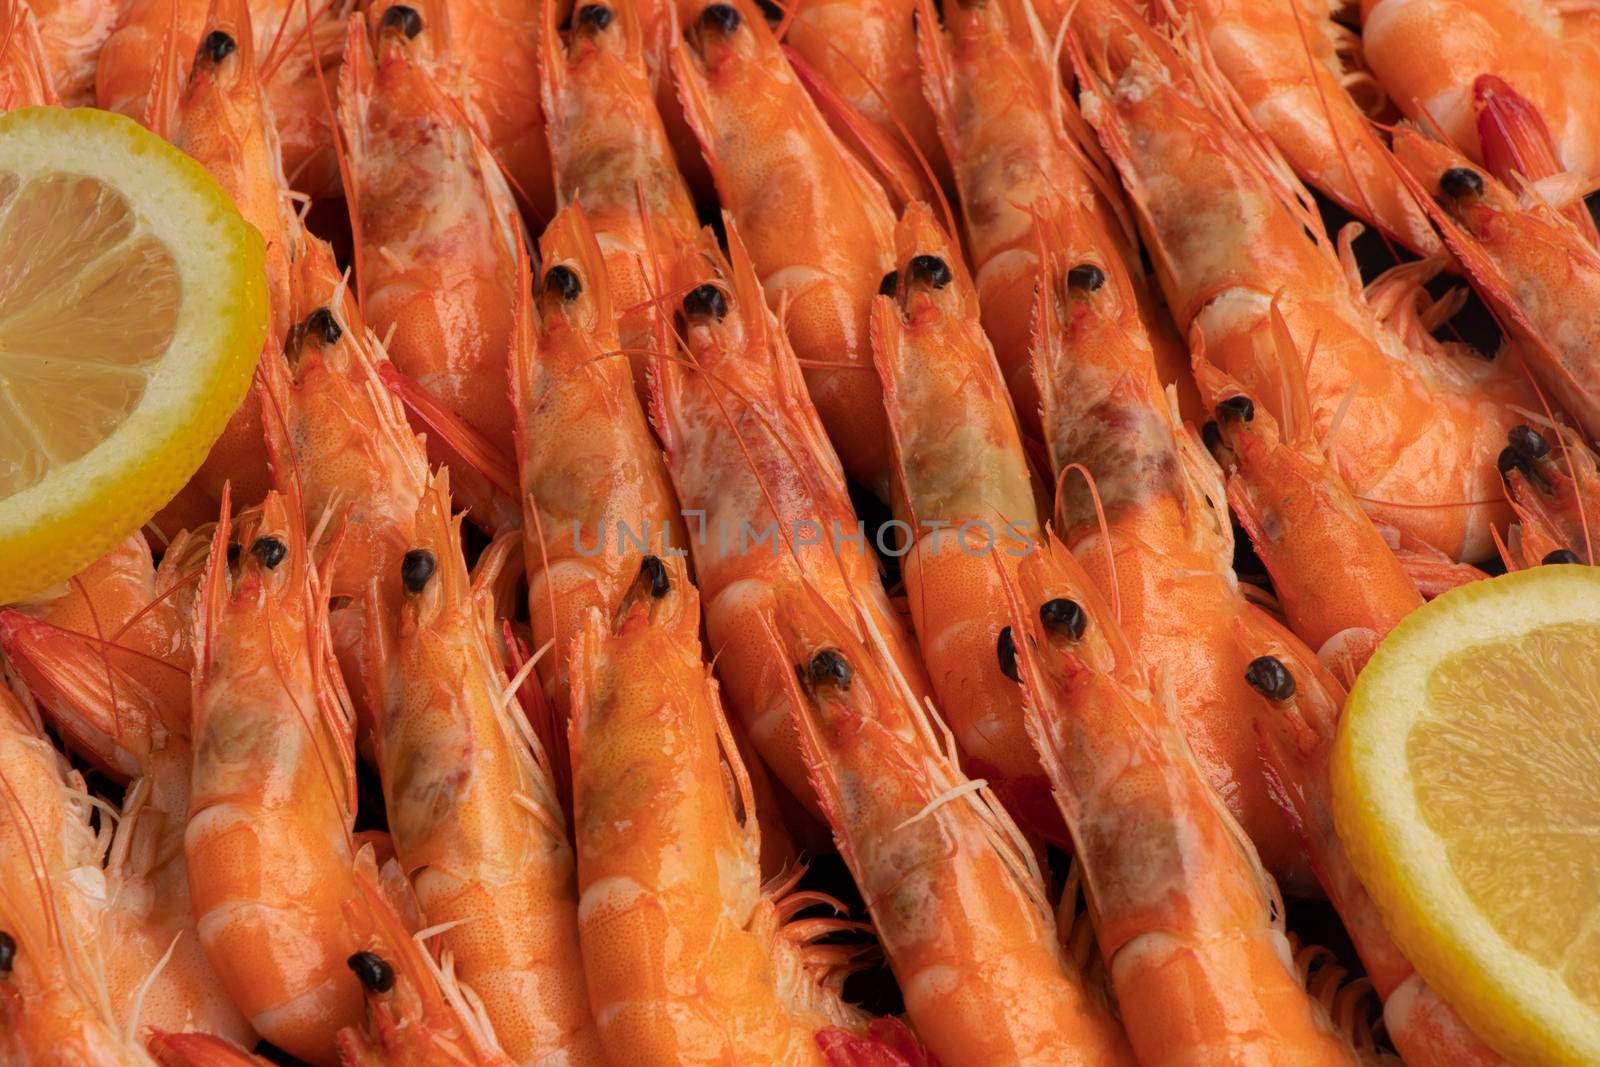 Fresh prawns on display at the supermarket. High quality photo. lie in even rows with lemon slices